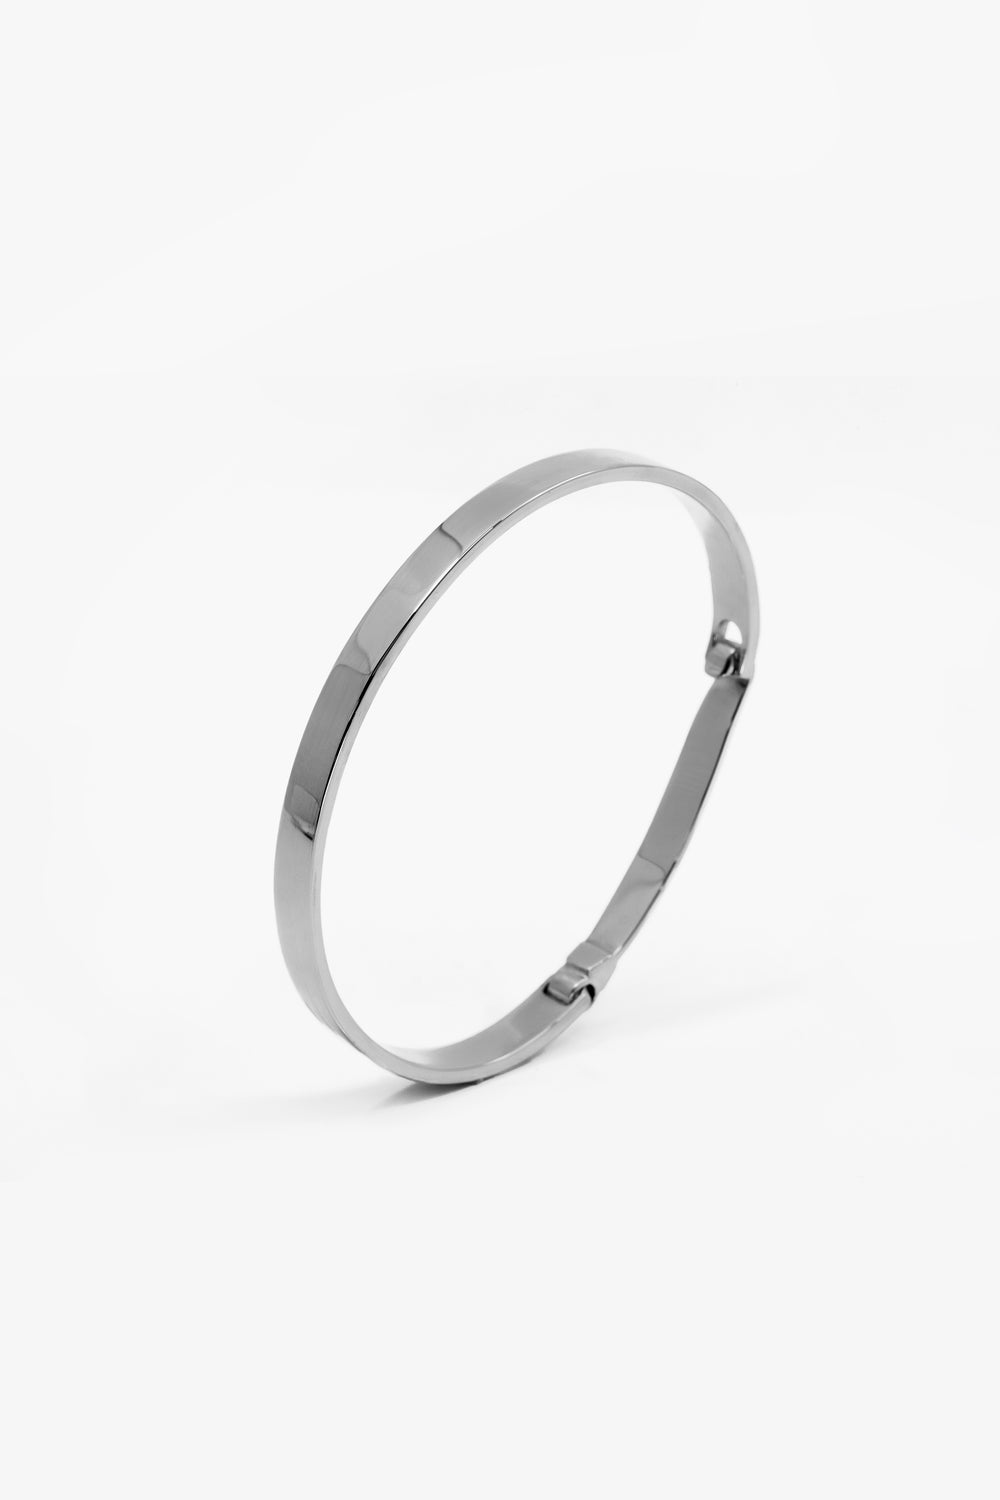 Tallows Bangle | Silver or White Gold, More Options Available| Natasha Schweitzer